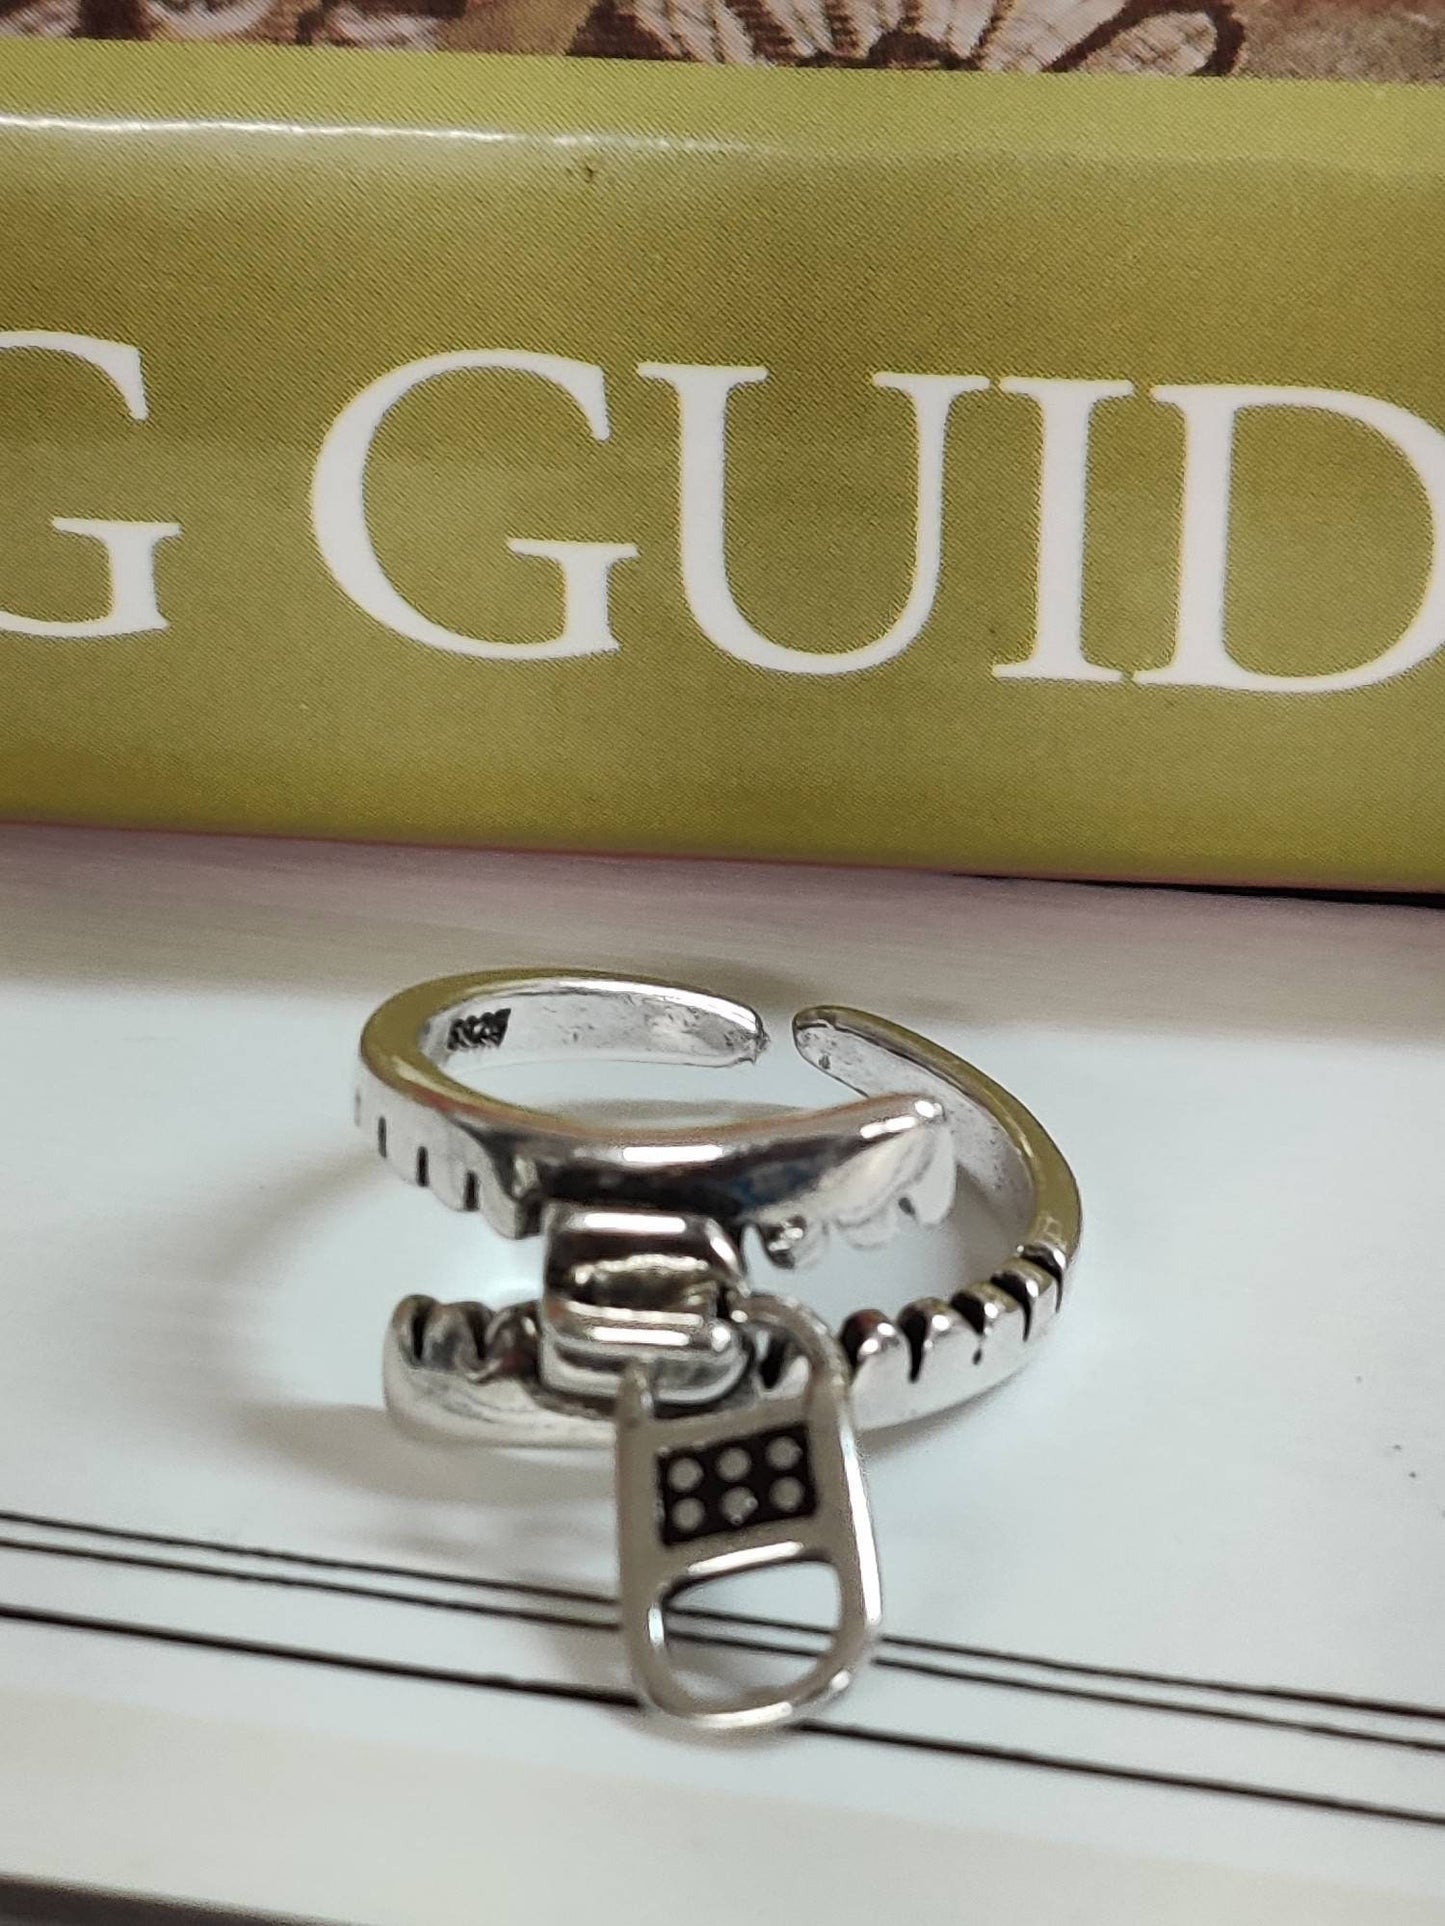 Sewing Theme Ring: Measuring Tape Ring or Zipper